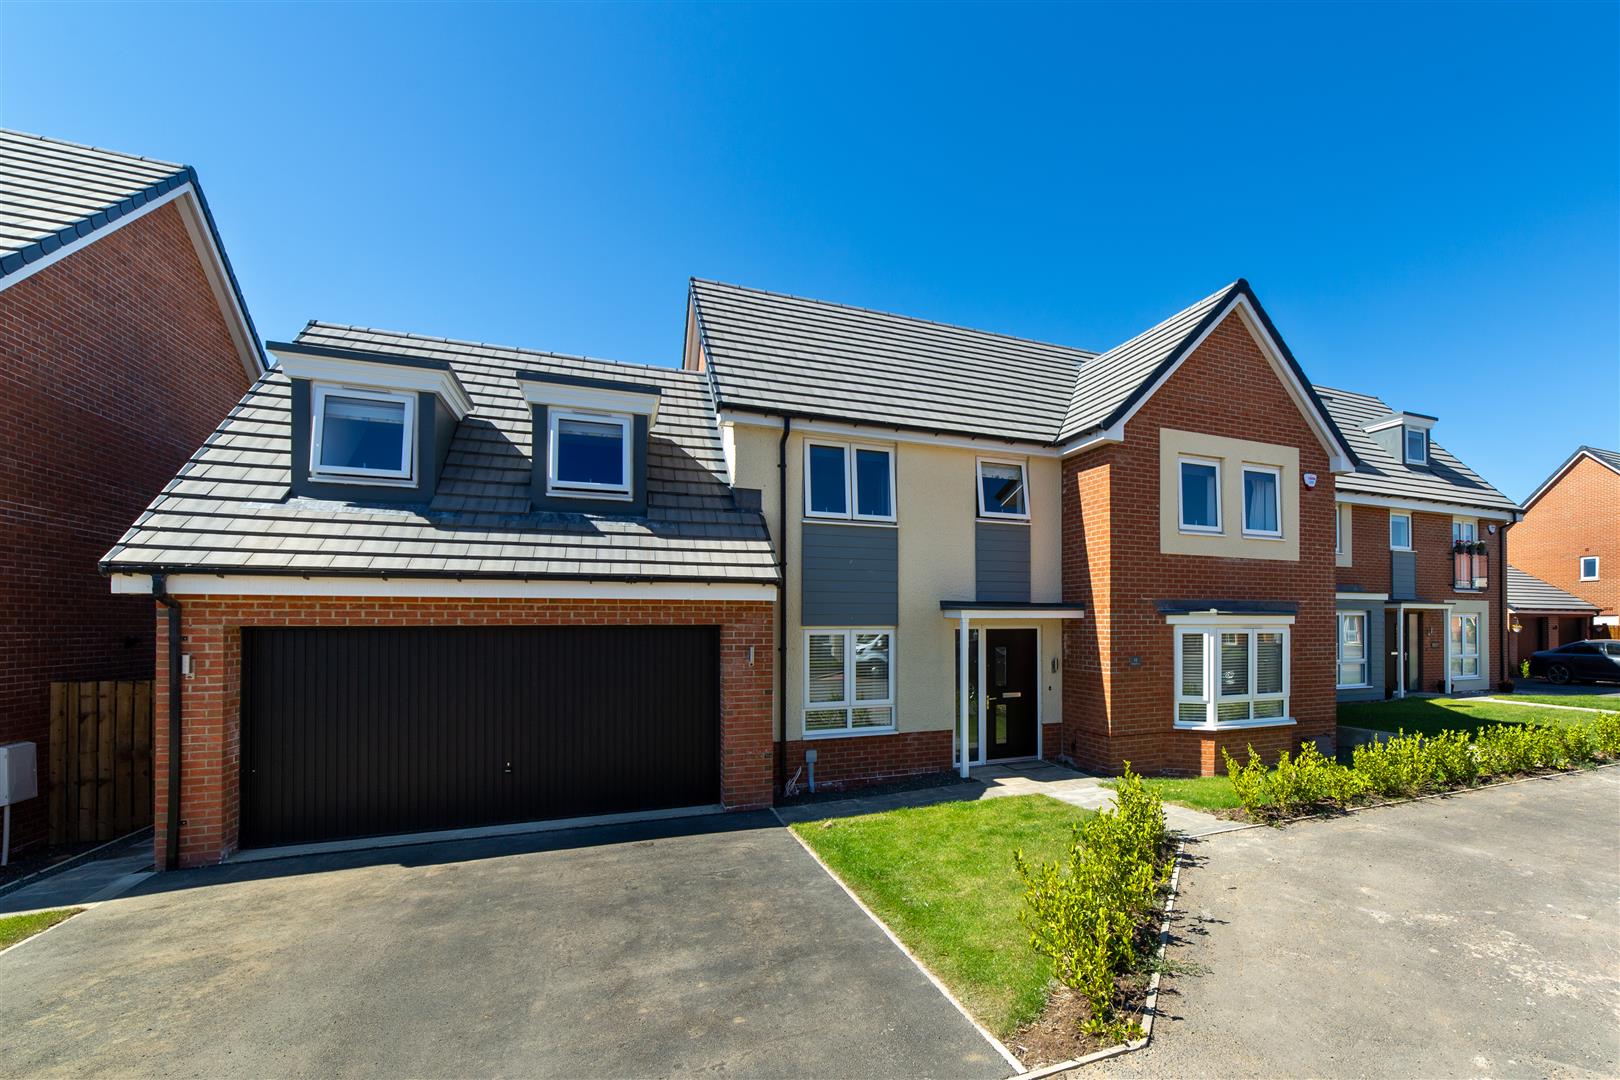 4 bed detached house for sale in Ringlet Drive, Great Park, NE13